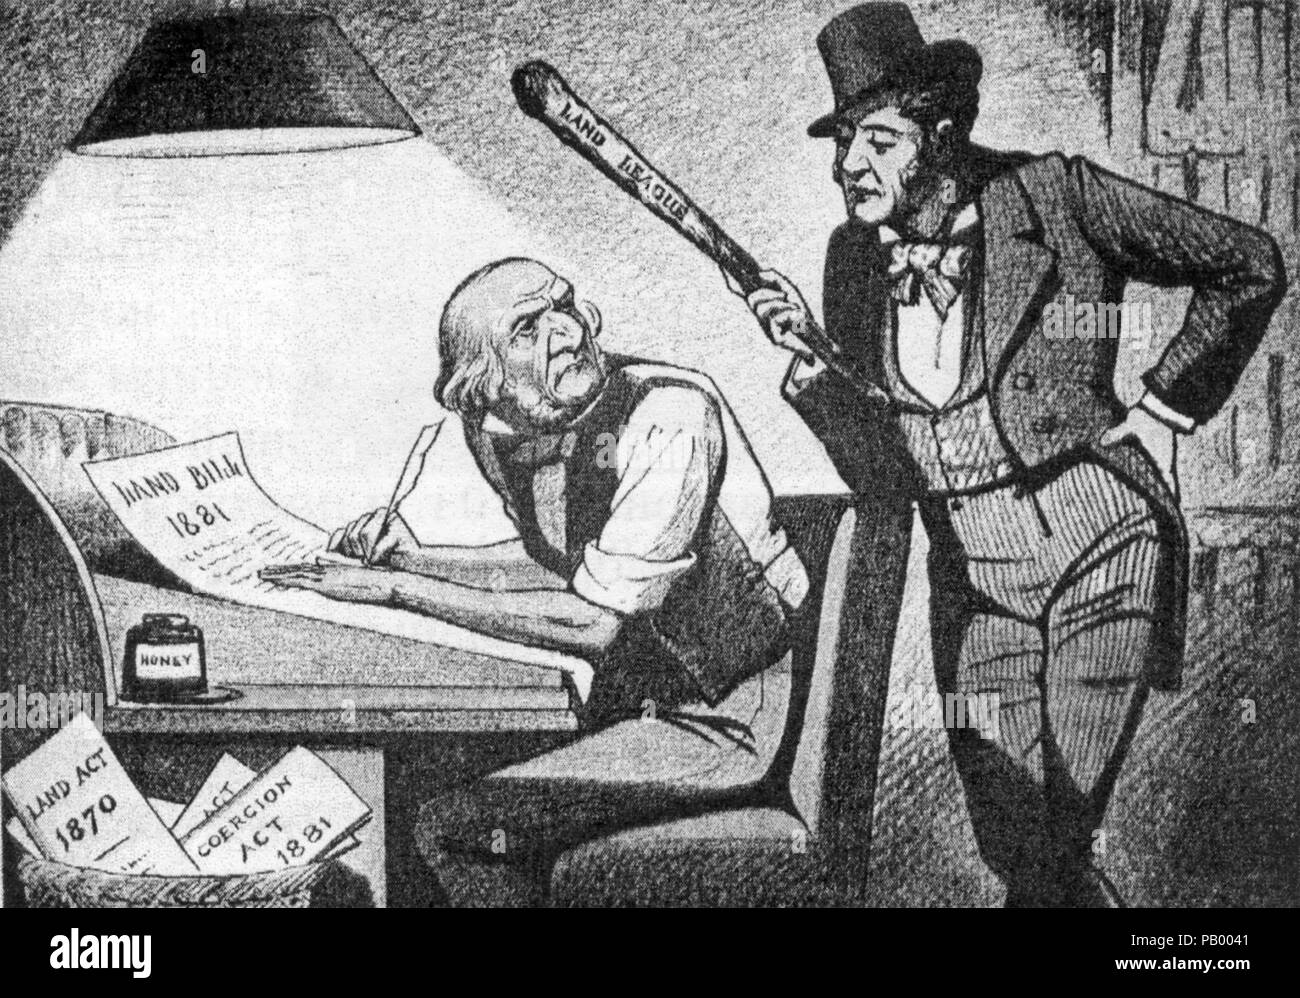 BRITISH PRIME MINISTER WILLIAM GLADSTONE composing the terms of the Land Law (Ireland) Act of 1881 watched over by a figure from the Irish National Land League Stock Photo